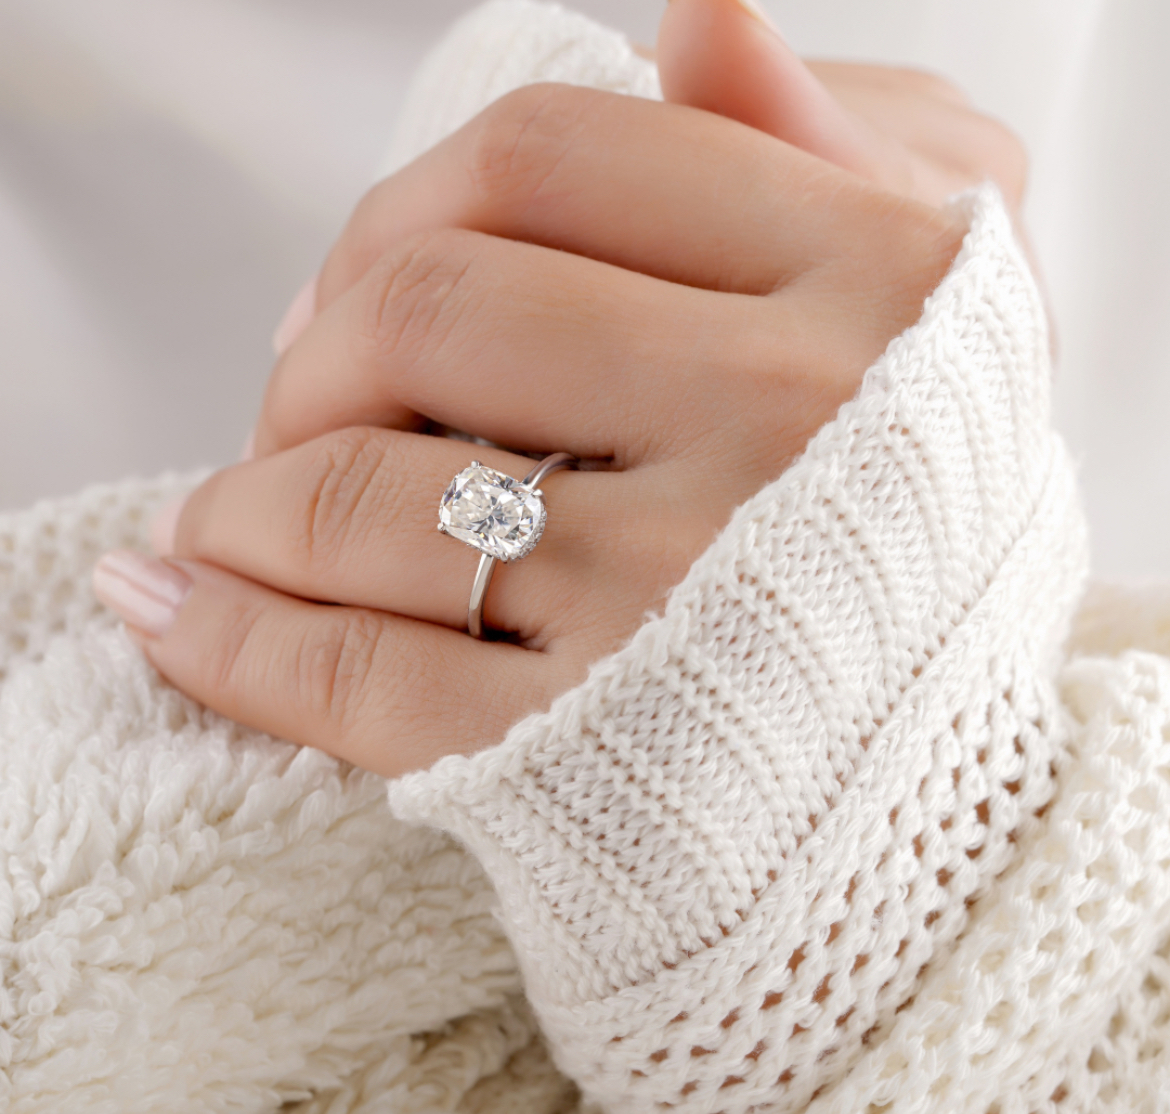 The Most Budget-Friendly Engagement Ring Style Is Simple And Timeless